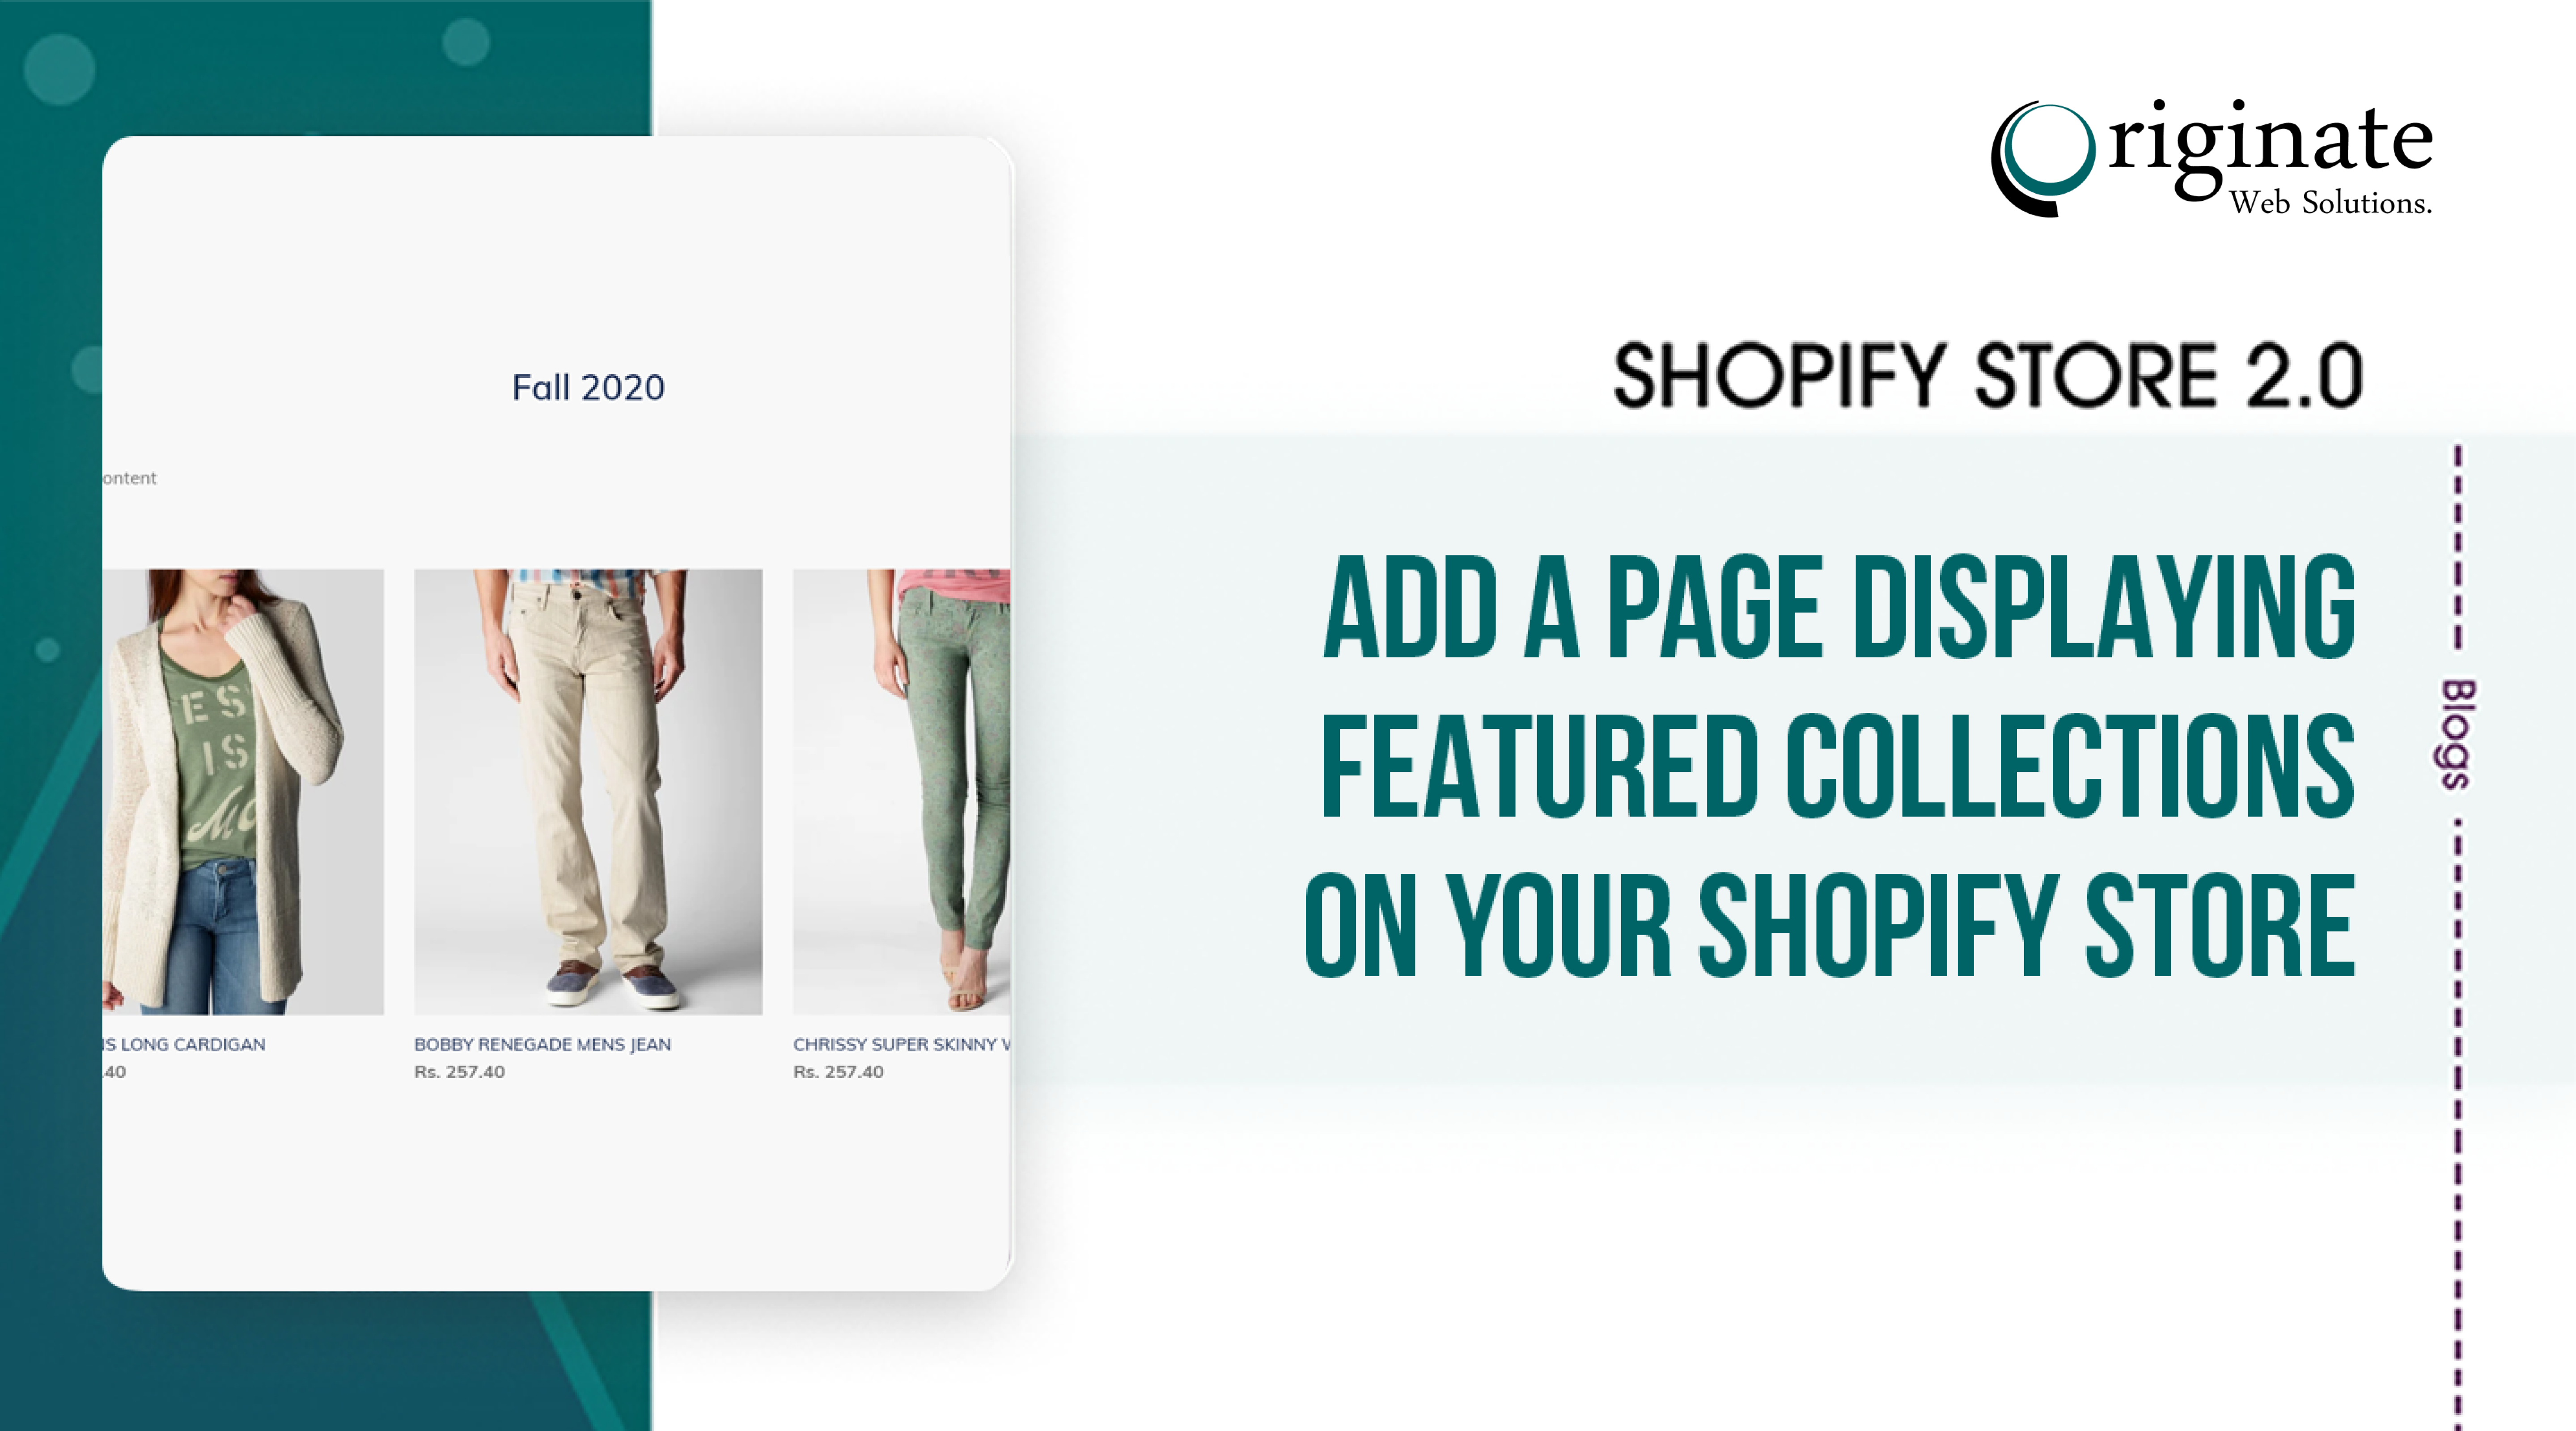 How to Add a Featured Collections Page to Your Shopify Store